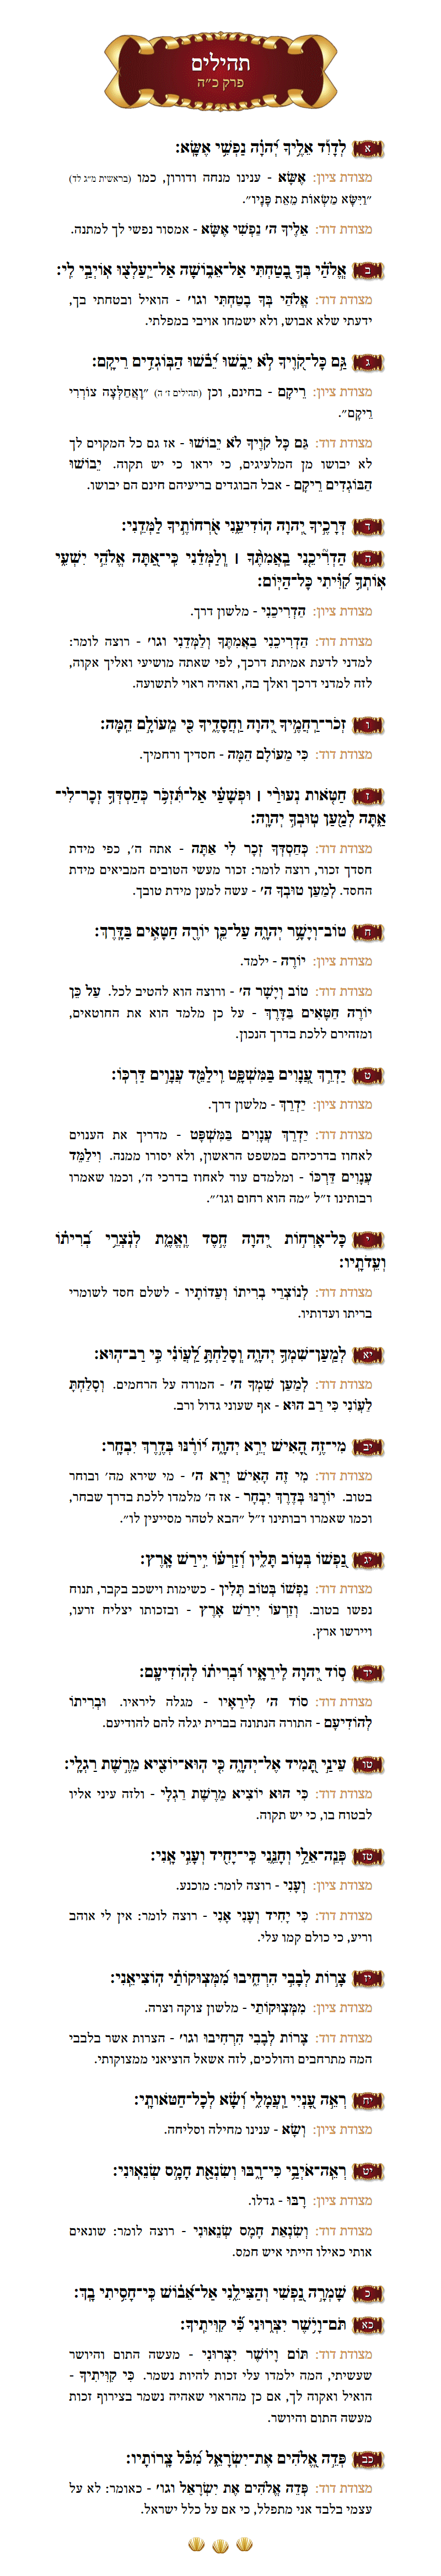 Sefer Tehillim Chapter 25 with commentary